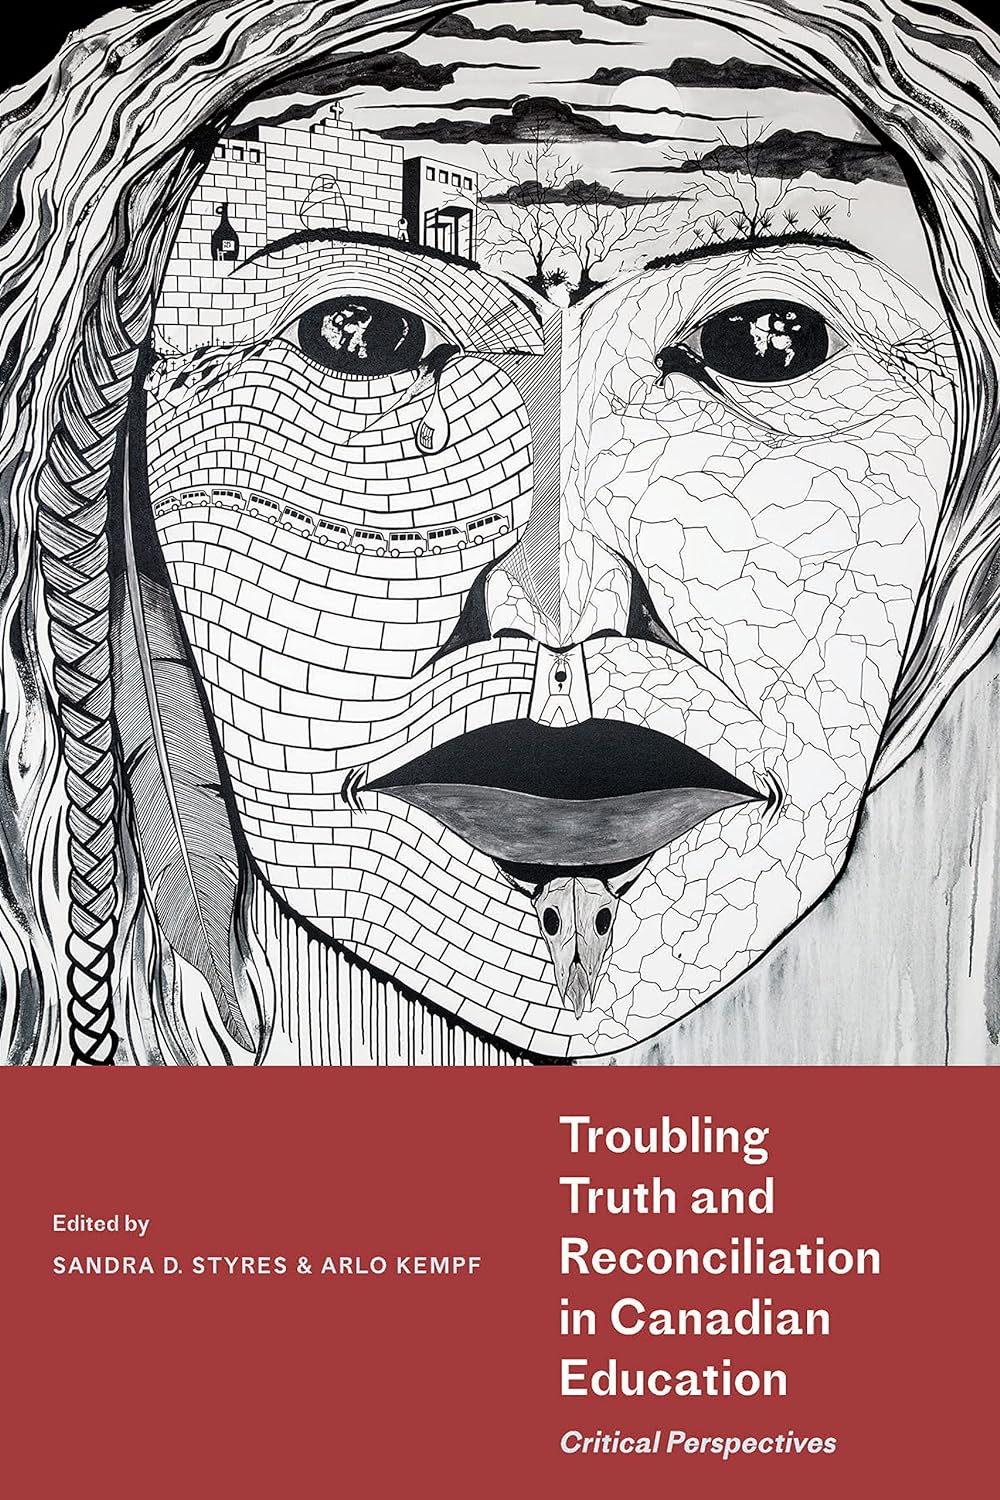 Troubling Truth and Reconciliation in Canadian Education edited by Sandra D. Styres & Arlo Kempf